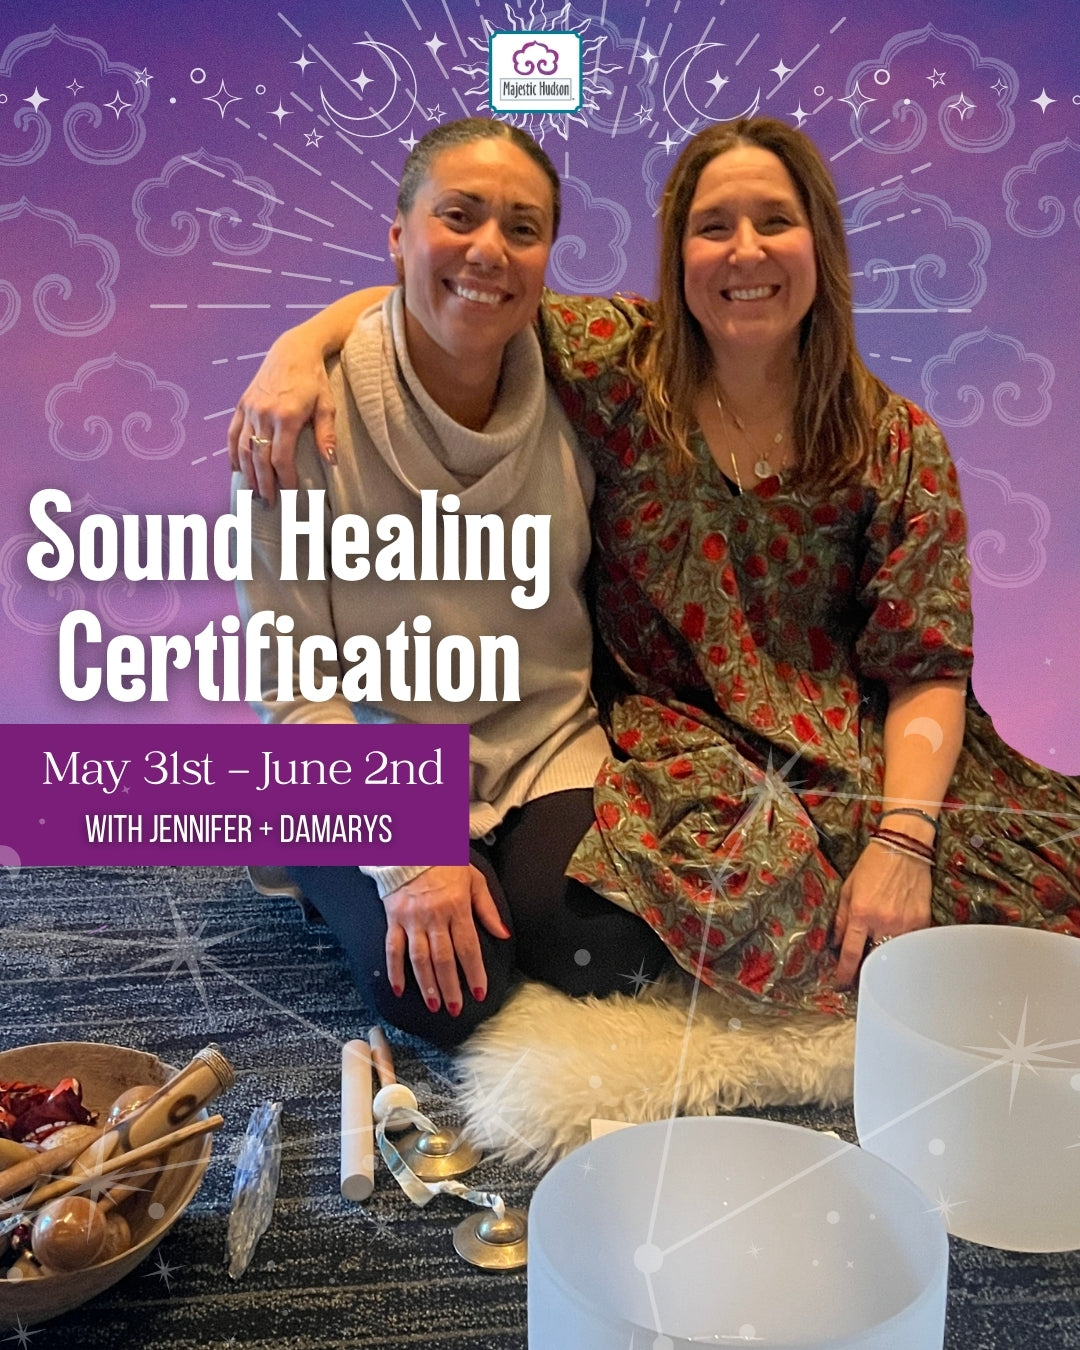 Sound Healing Certification | May 31st - June 2nd